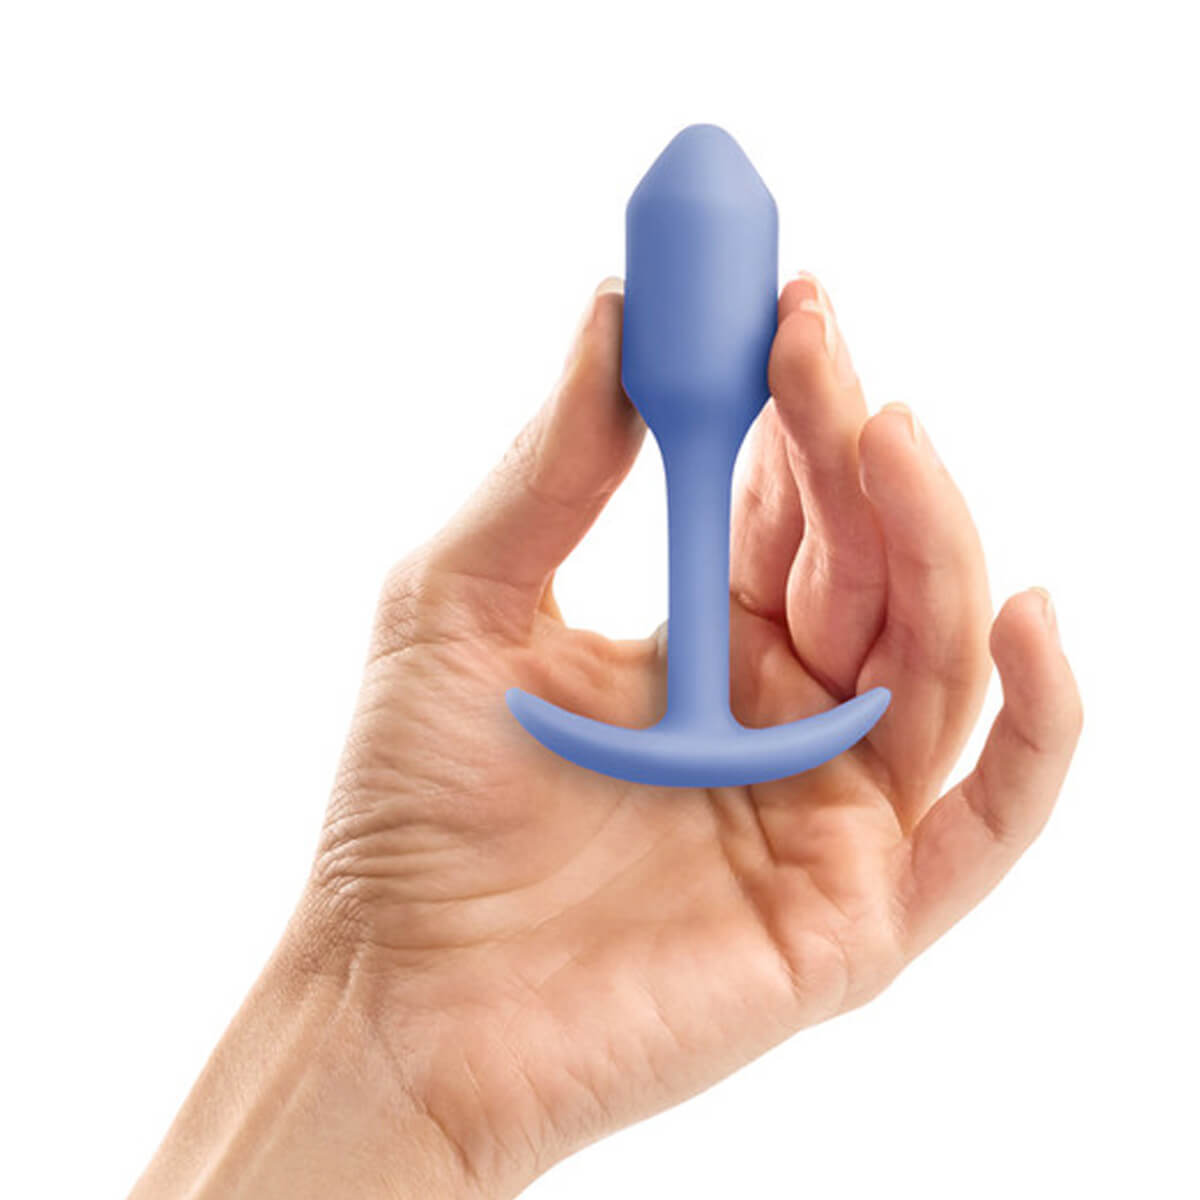 Hands holding a blue silicone butt plug with torpedo-shaped head Nudie Co